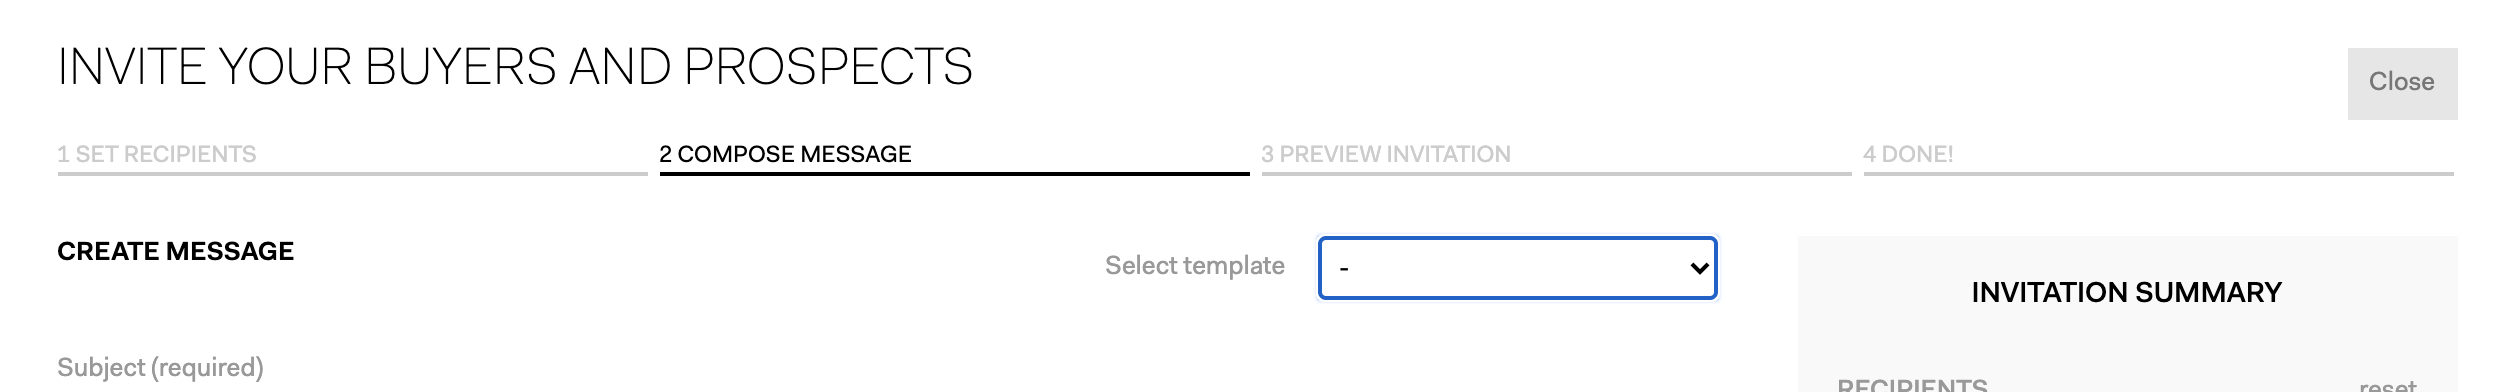 invitation-template-2.png